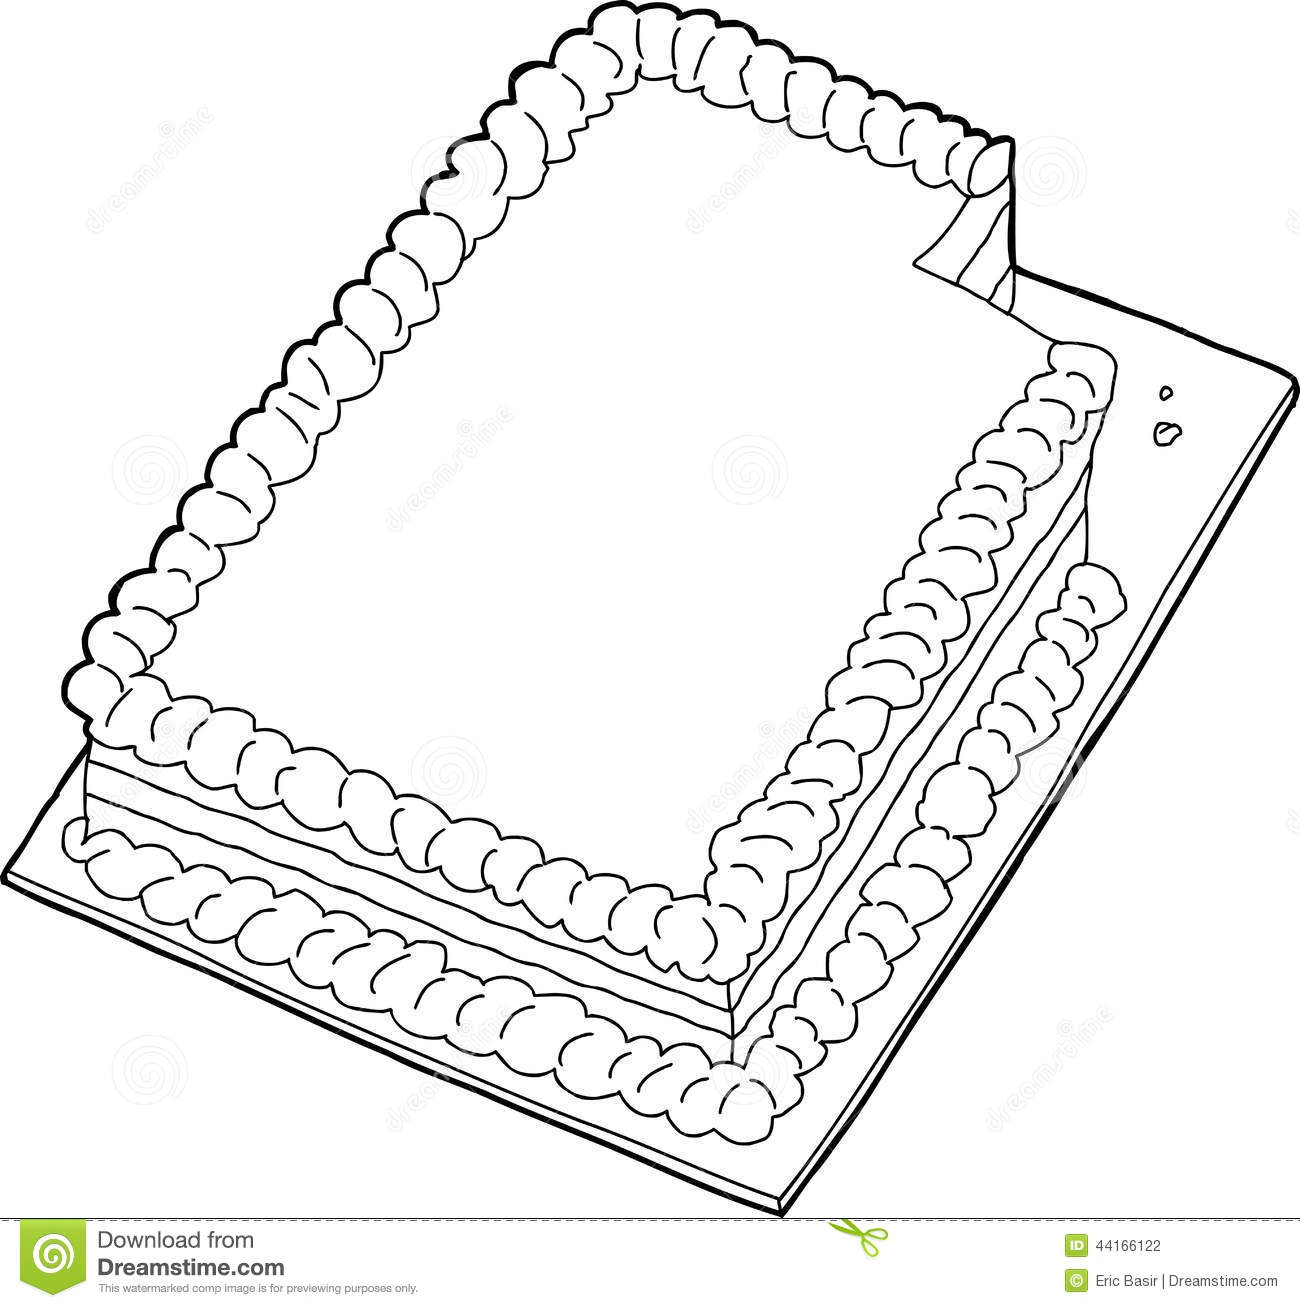 Outlined Cake With Missing Slice Stock Vector   Image  44166122